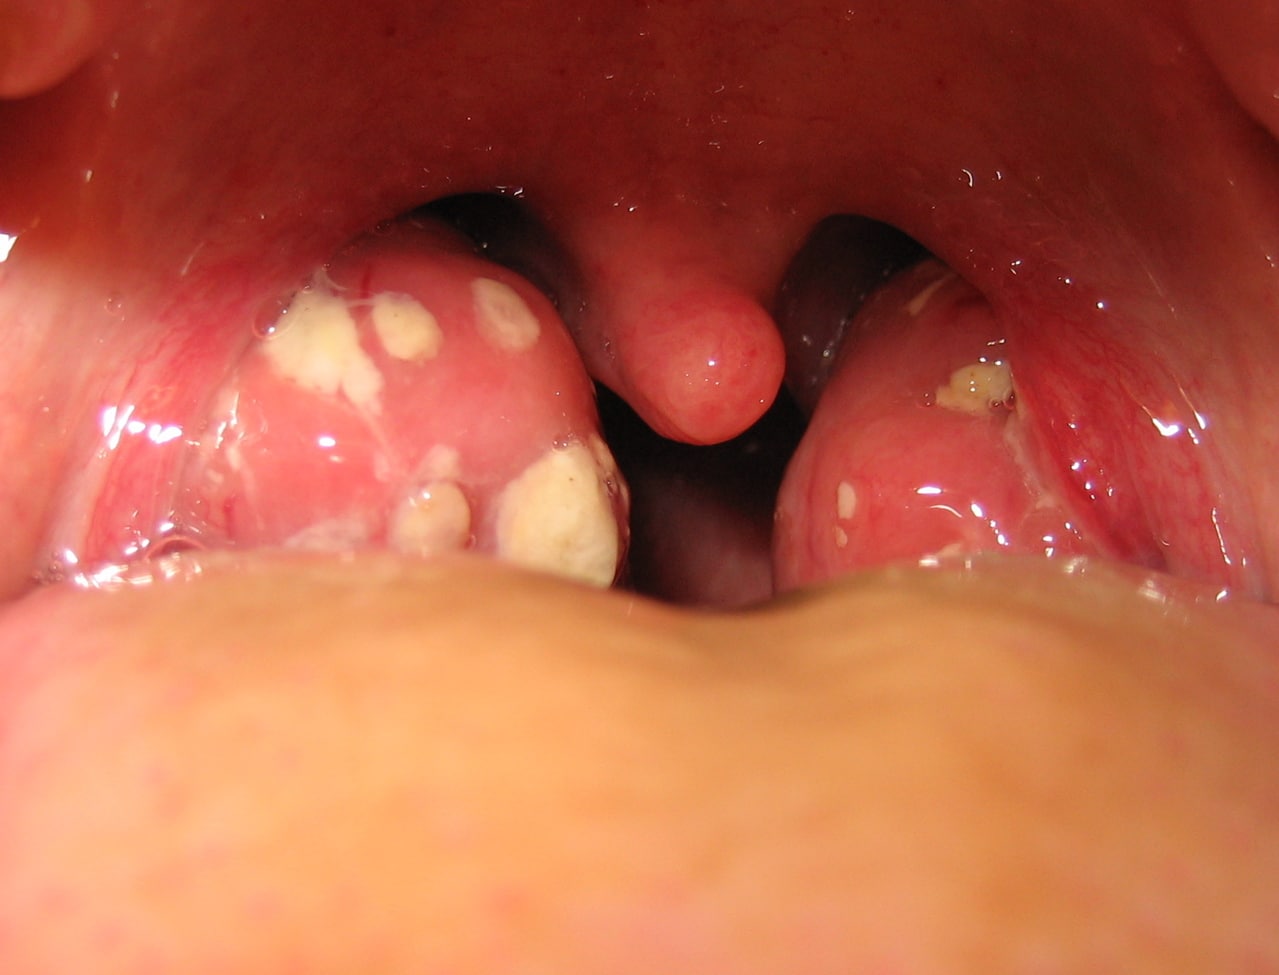 Inside of mouth showing normal throat and tonsils - Stock Image